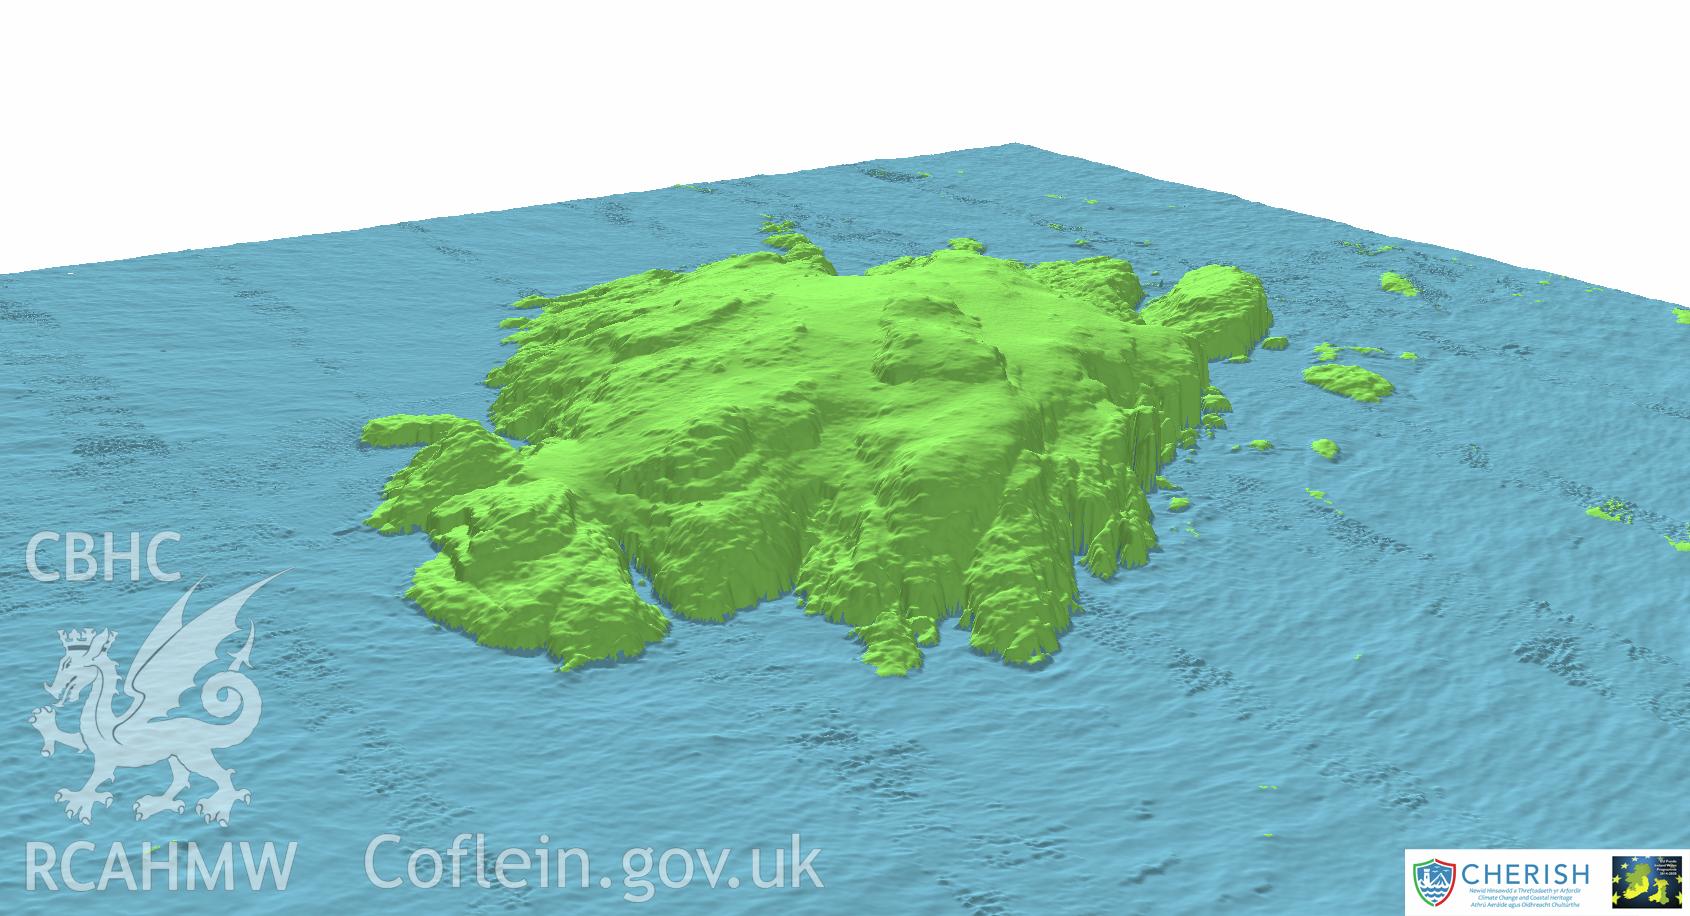 Ynys Gwales (Grassholm Island). Airborne laser scanning (LiDAR) commissioned by the CHERISH Project 2017-2021, flown by Bluesky International LTD at low tide on 24th February 2017. View showing Grassholm Island facing south.